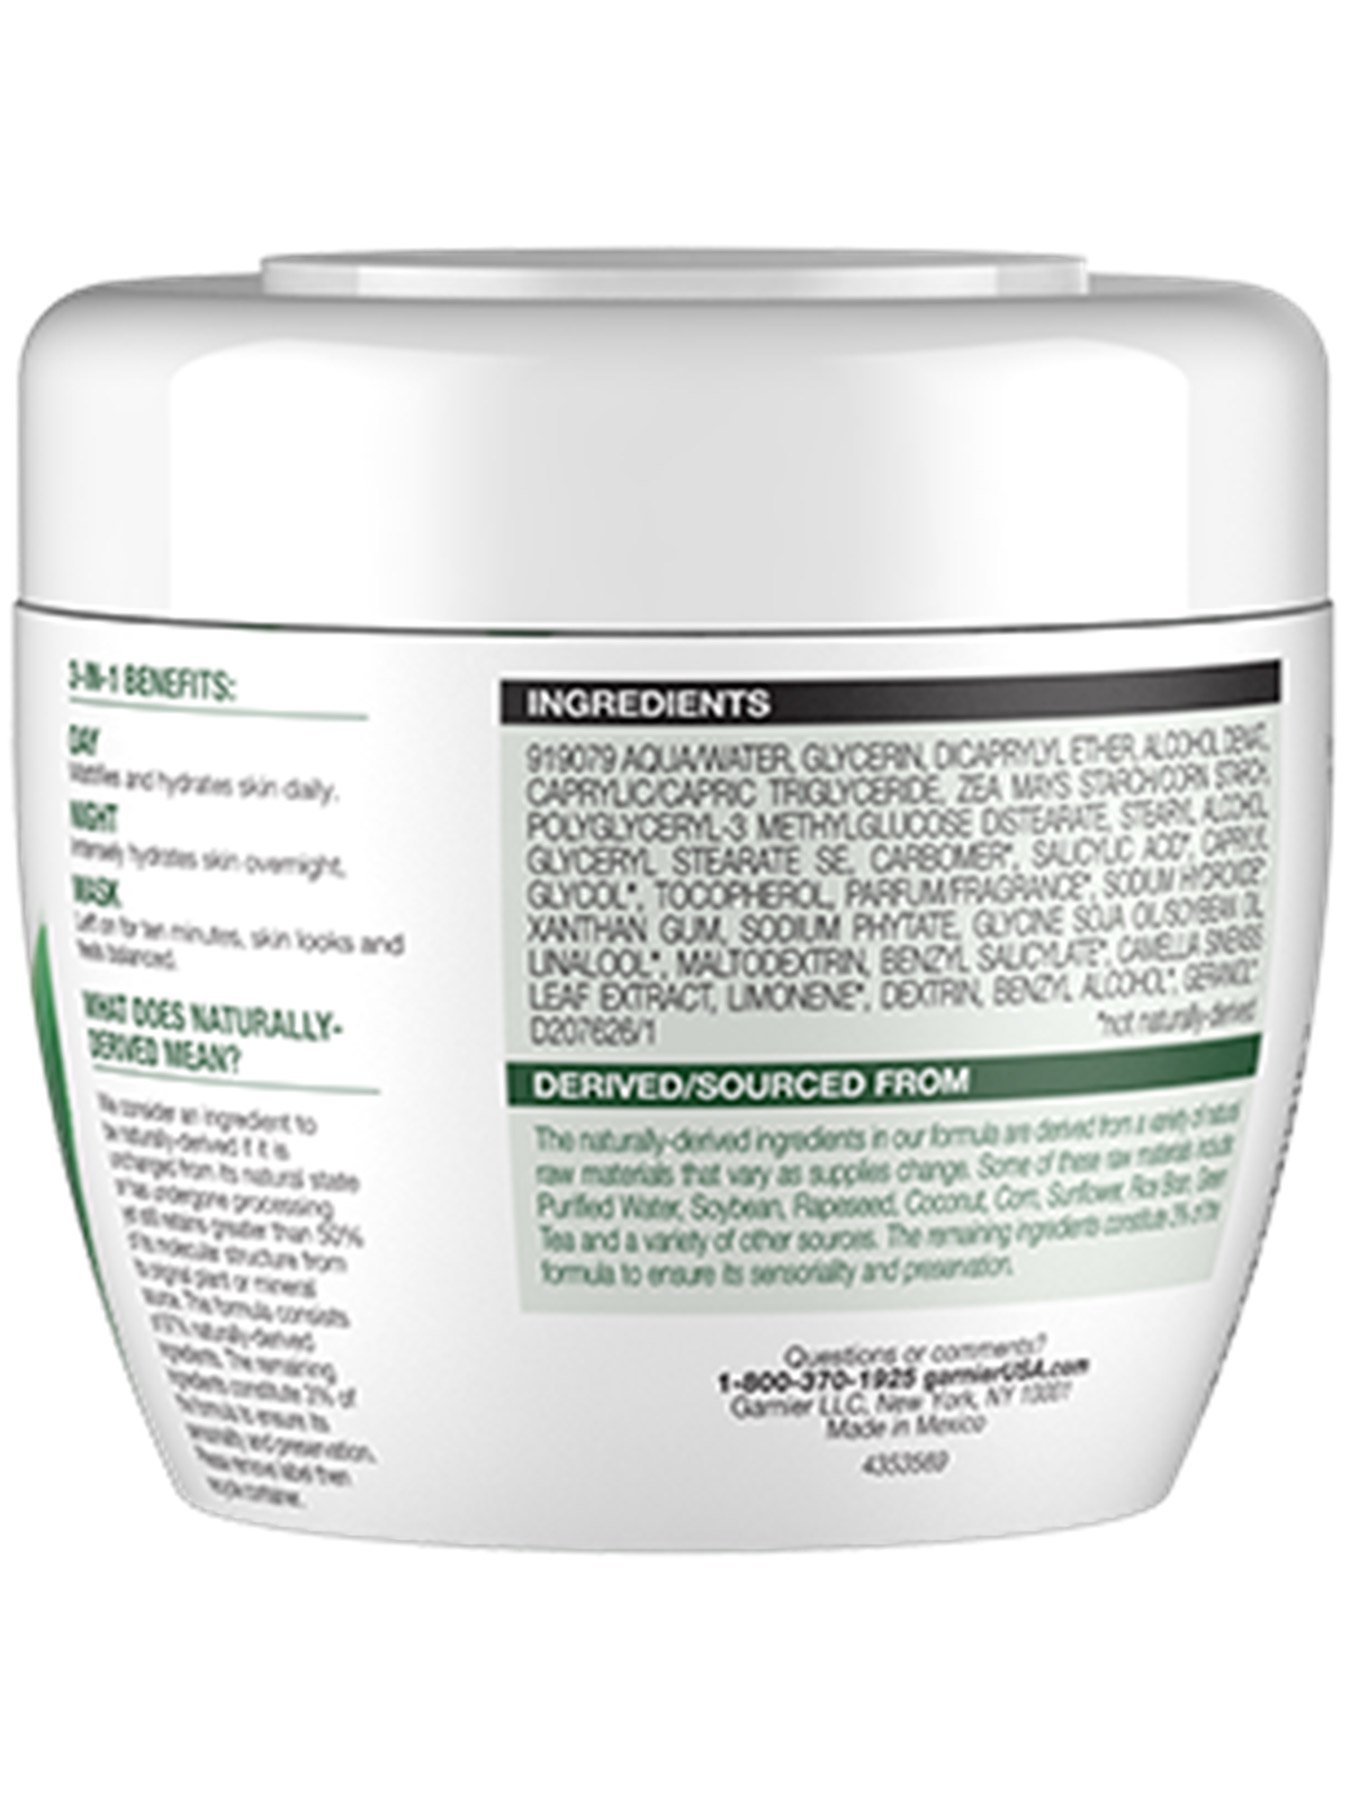 Back view of Garnier SkinActive Balancing 3-in-1 Face Moisturizer with Green Tea.